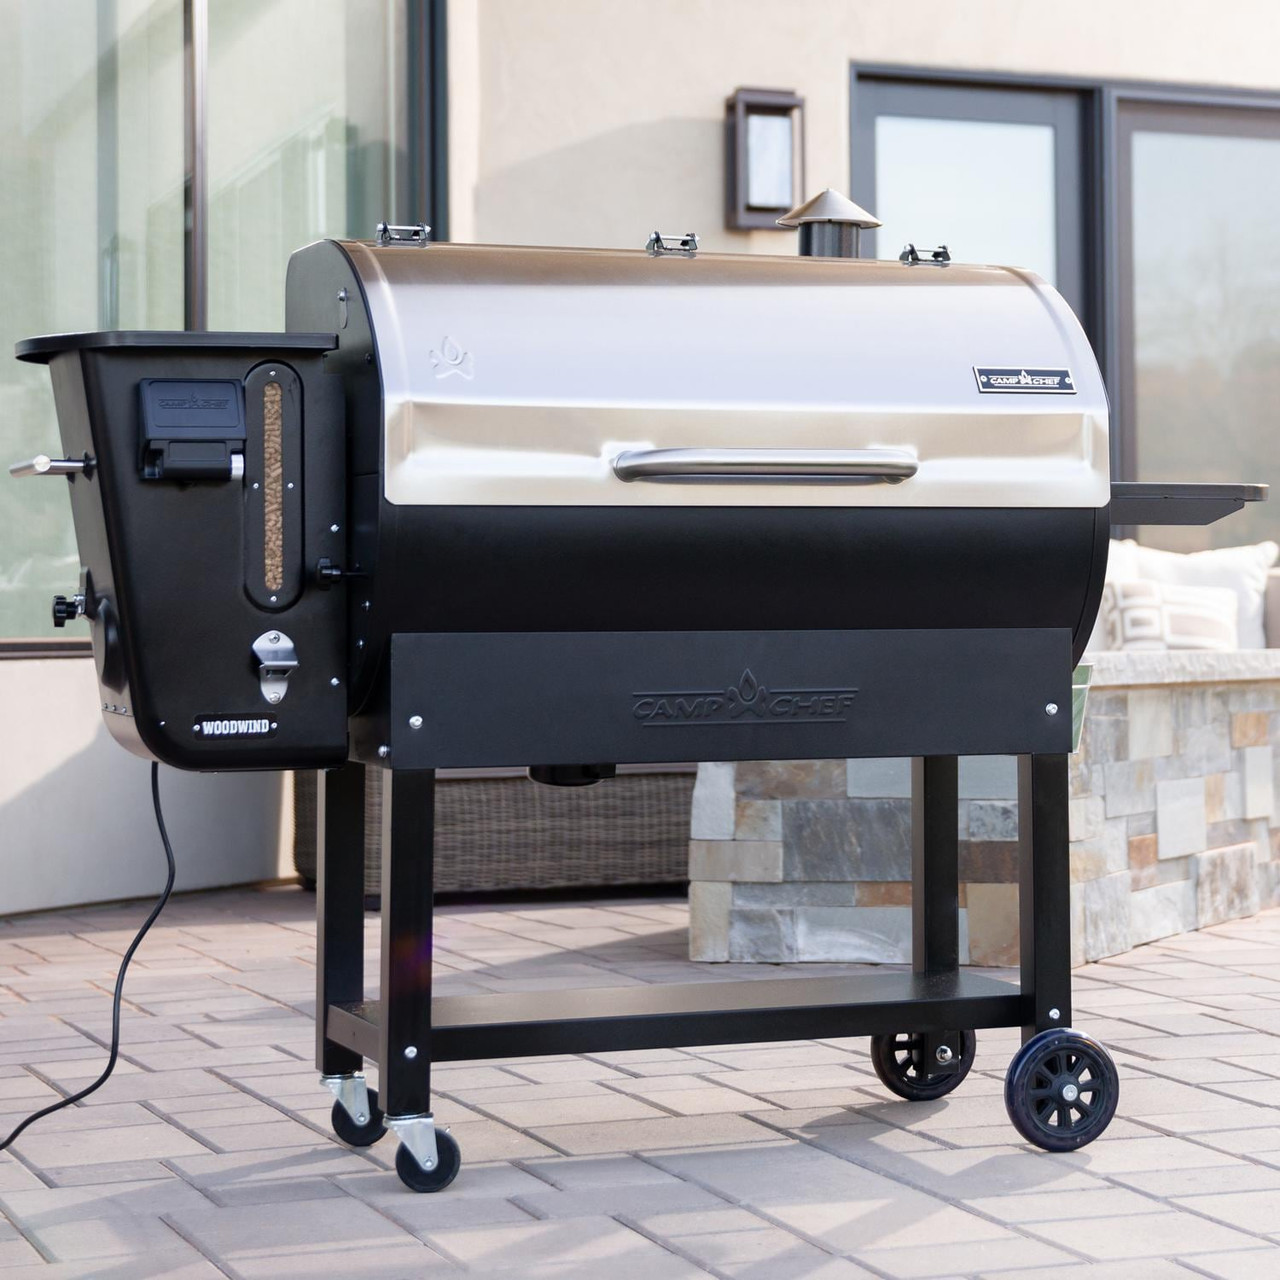 Camp Chef 36" Woodwind CL Pellet Grill With Wifi